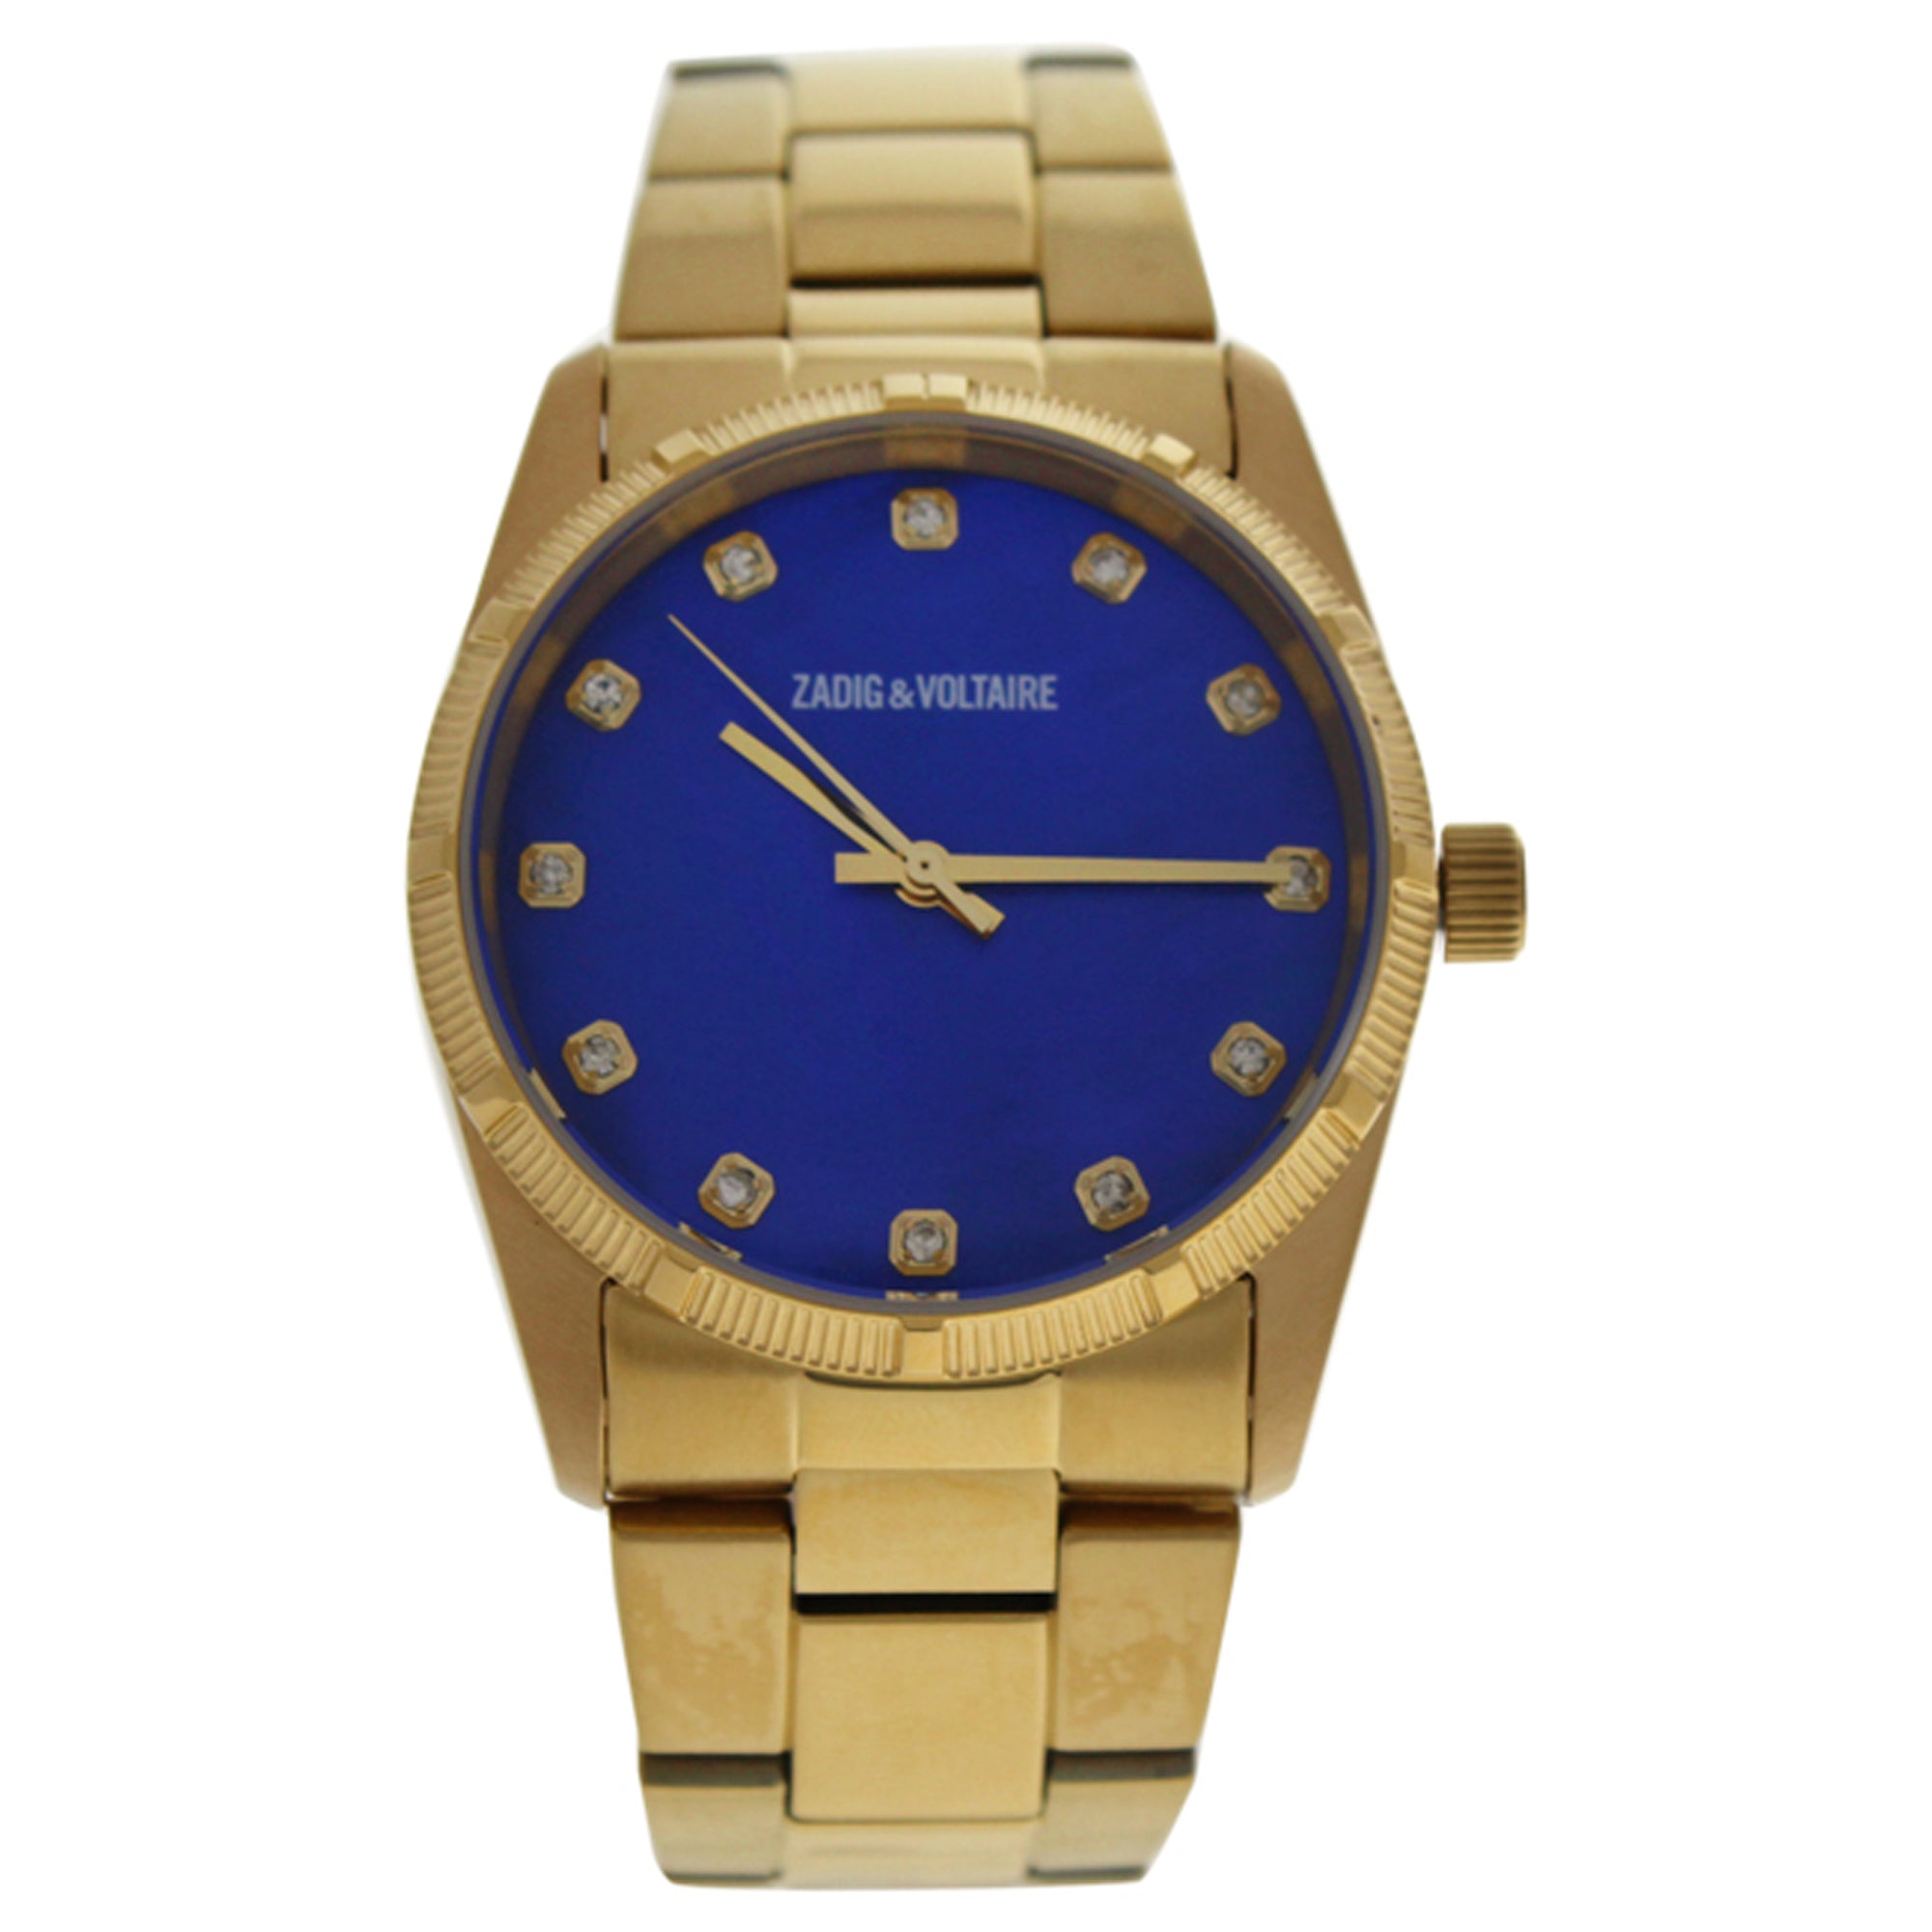 ZVF220 Blue Dial/Gold Stainless Steel Bracelet Watch by Zadig & Voltaire for Unisex - 1 Pc Watch